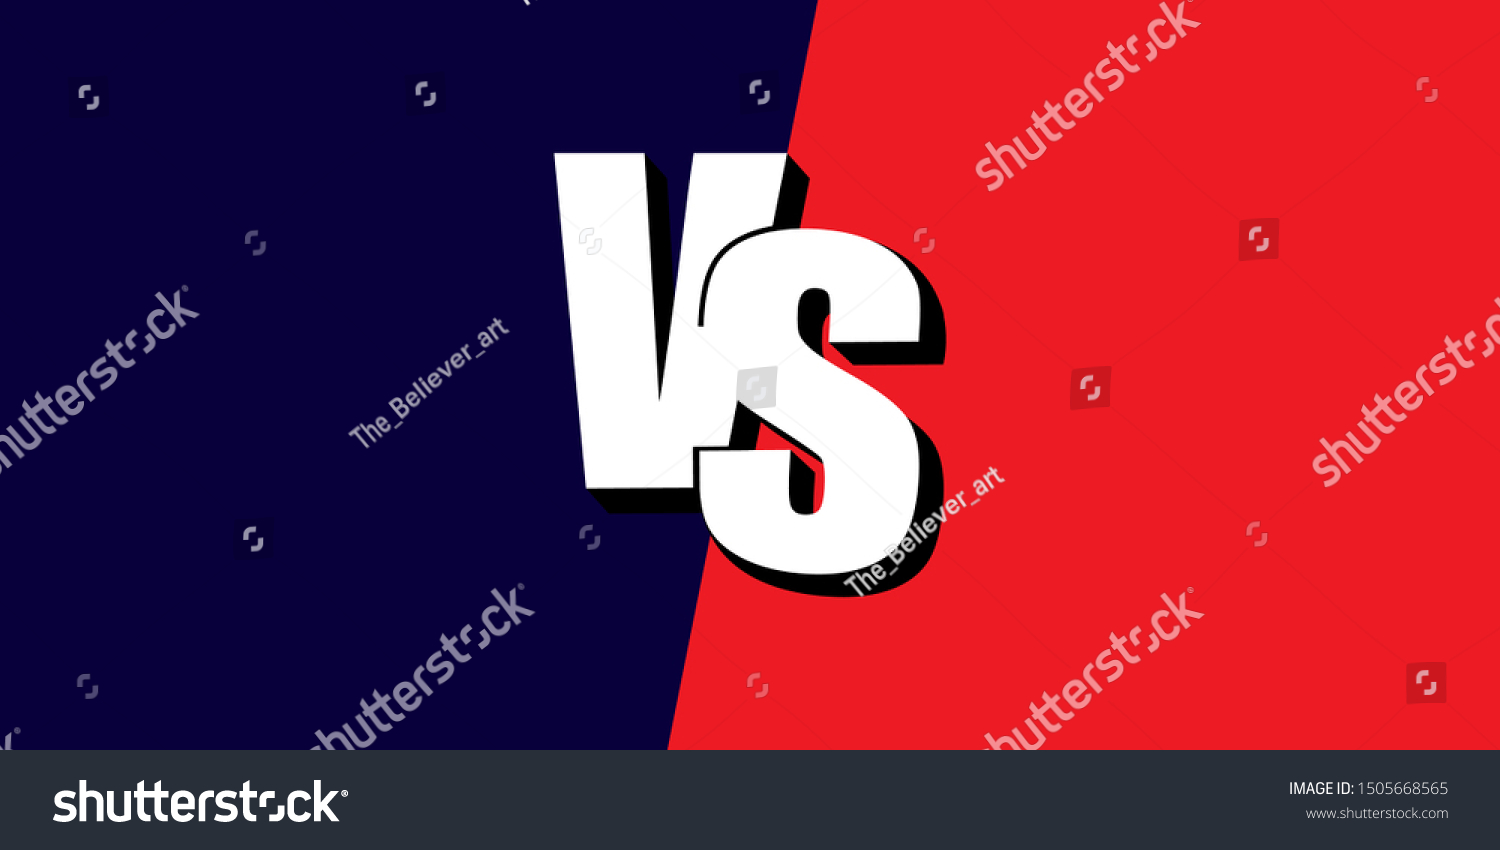 Vs Versus White On Red Blue Stock Vector Royalty Free 1505668565